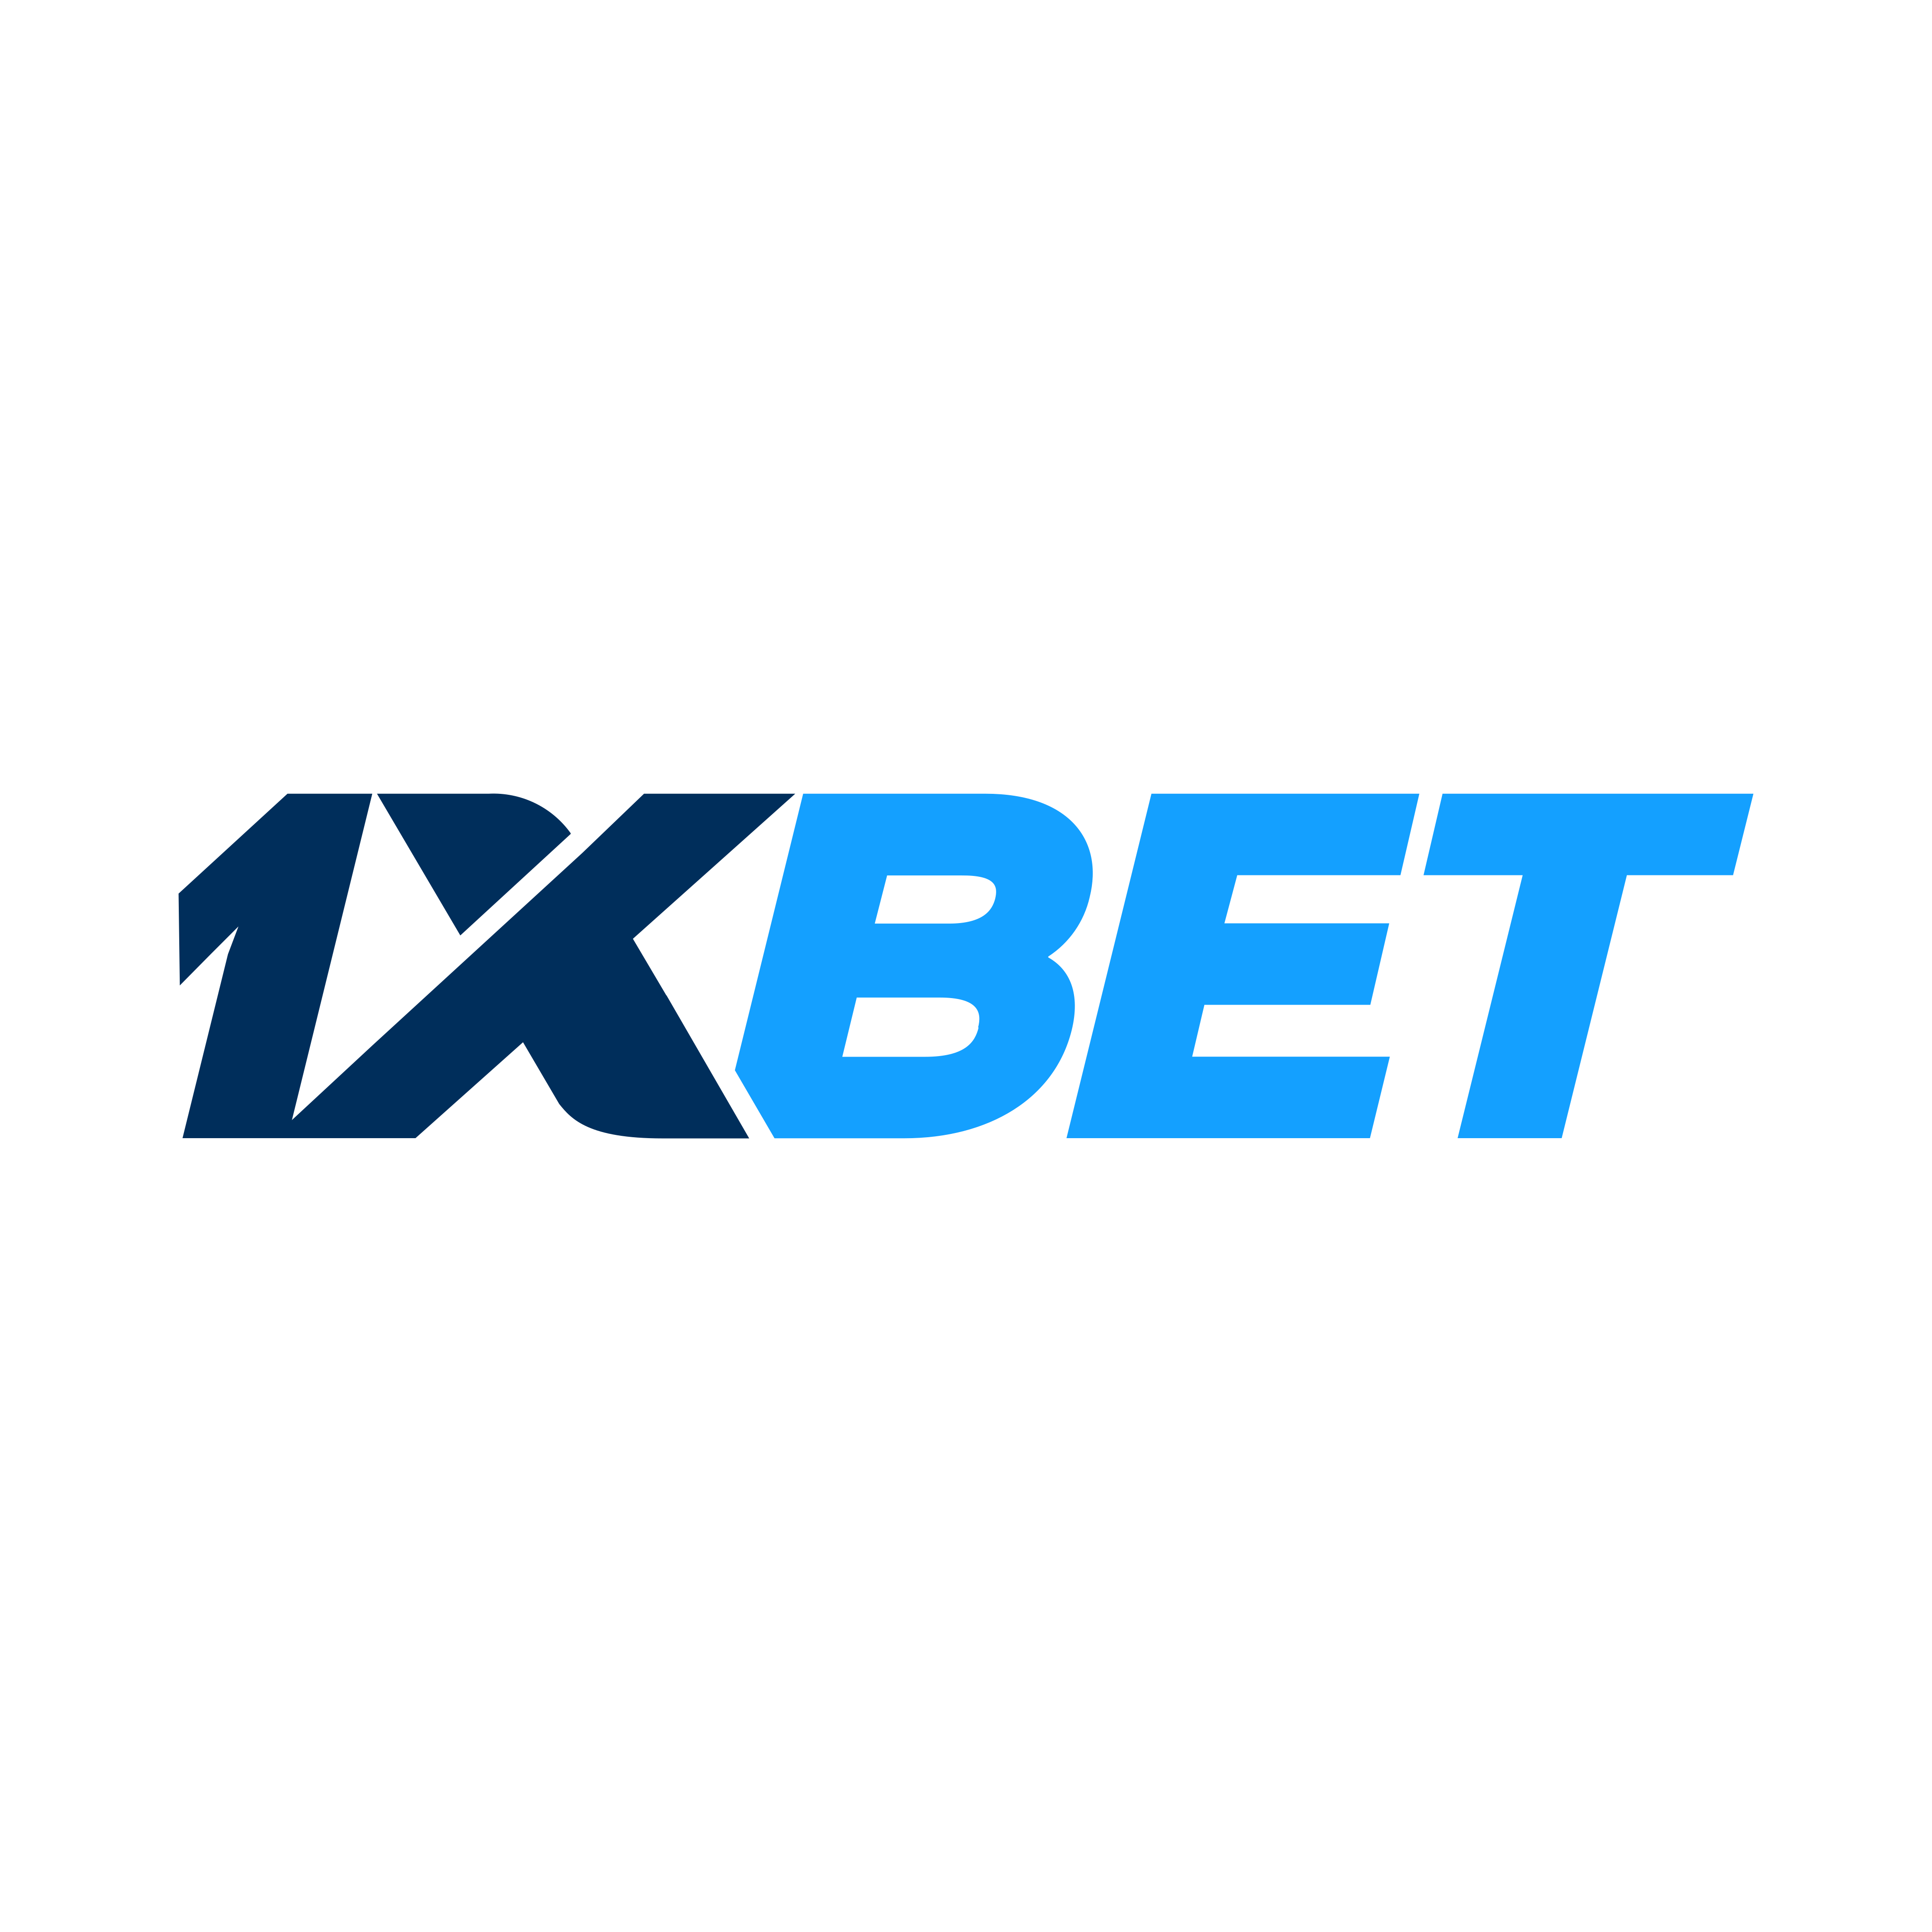 1xBet agent Khadka found involved in online gambling using others’ citizenship without consent